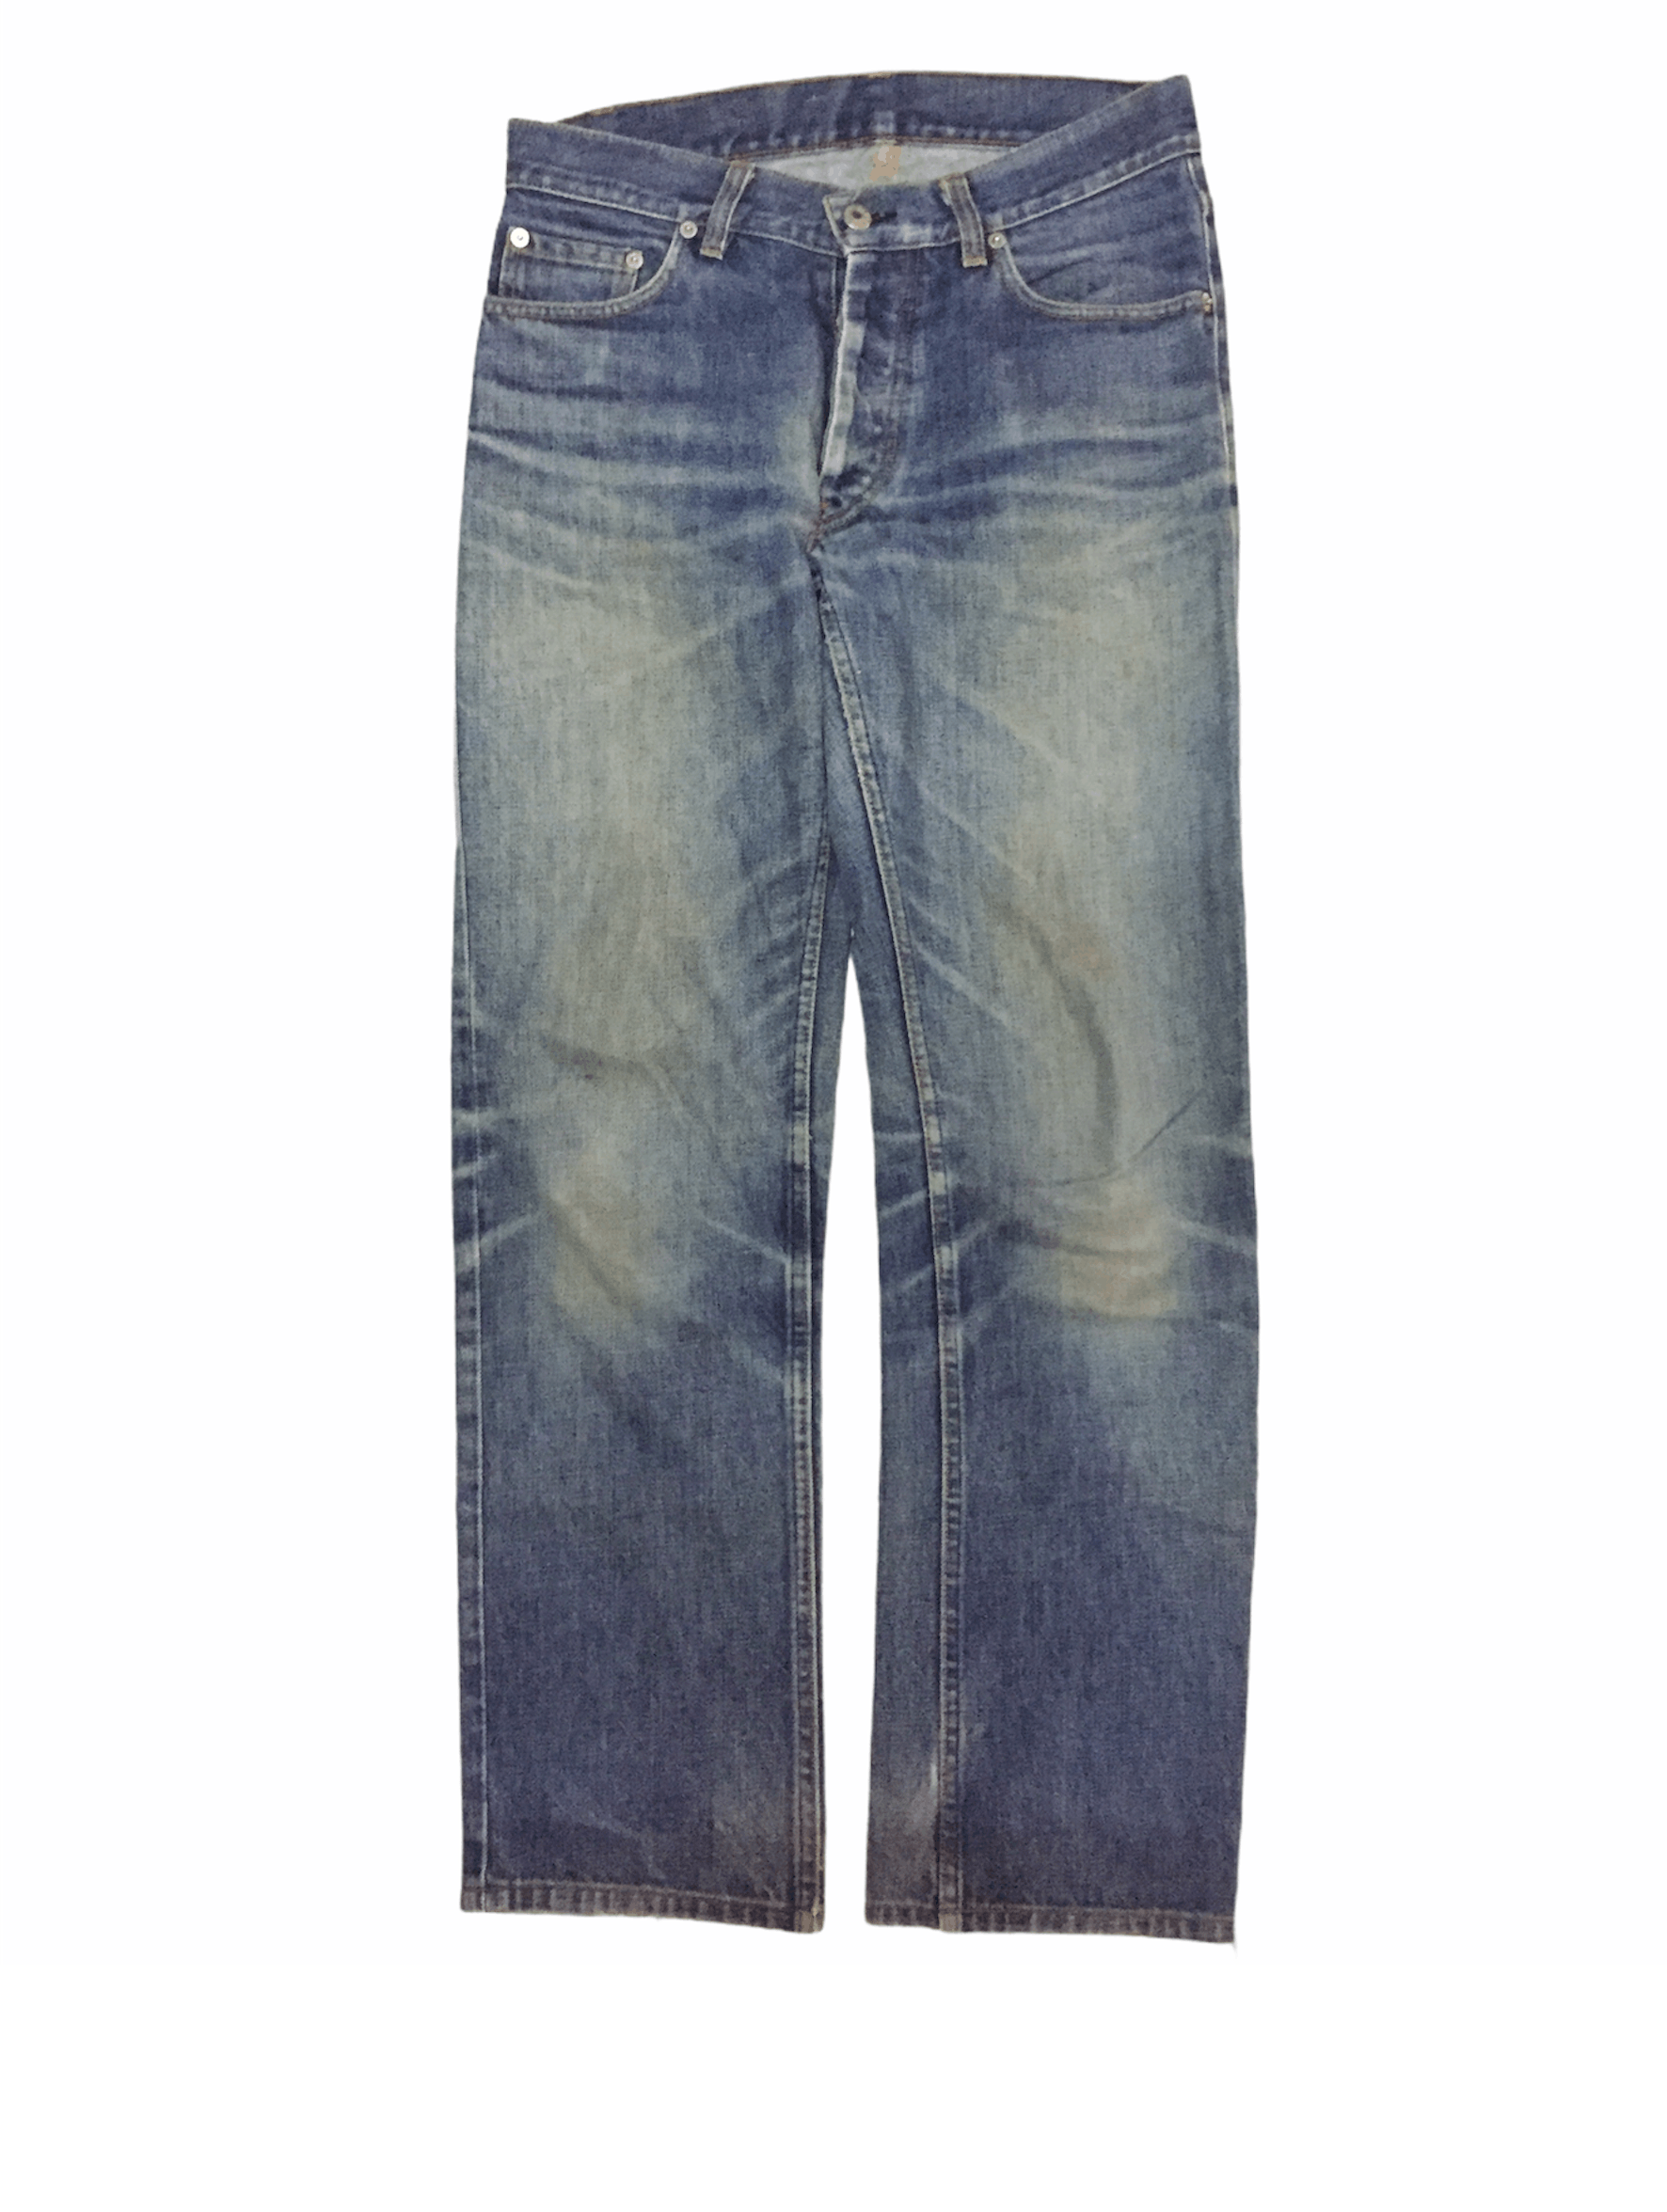 Helmut Lang SS98 faded denim Size US 29 - 1 Preview